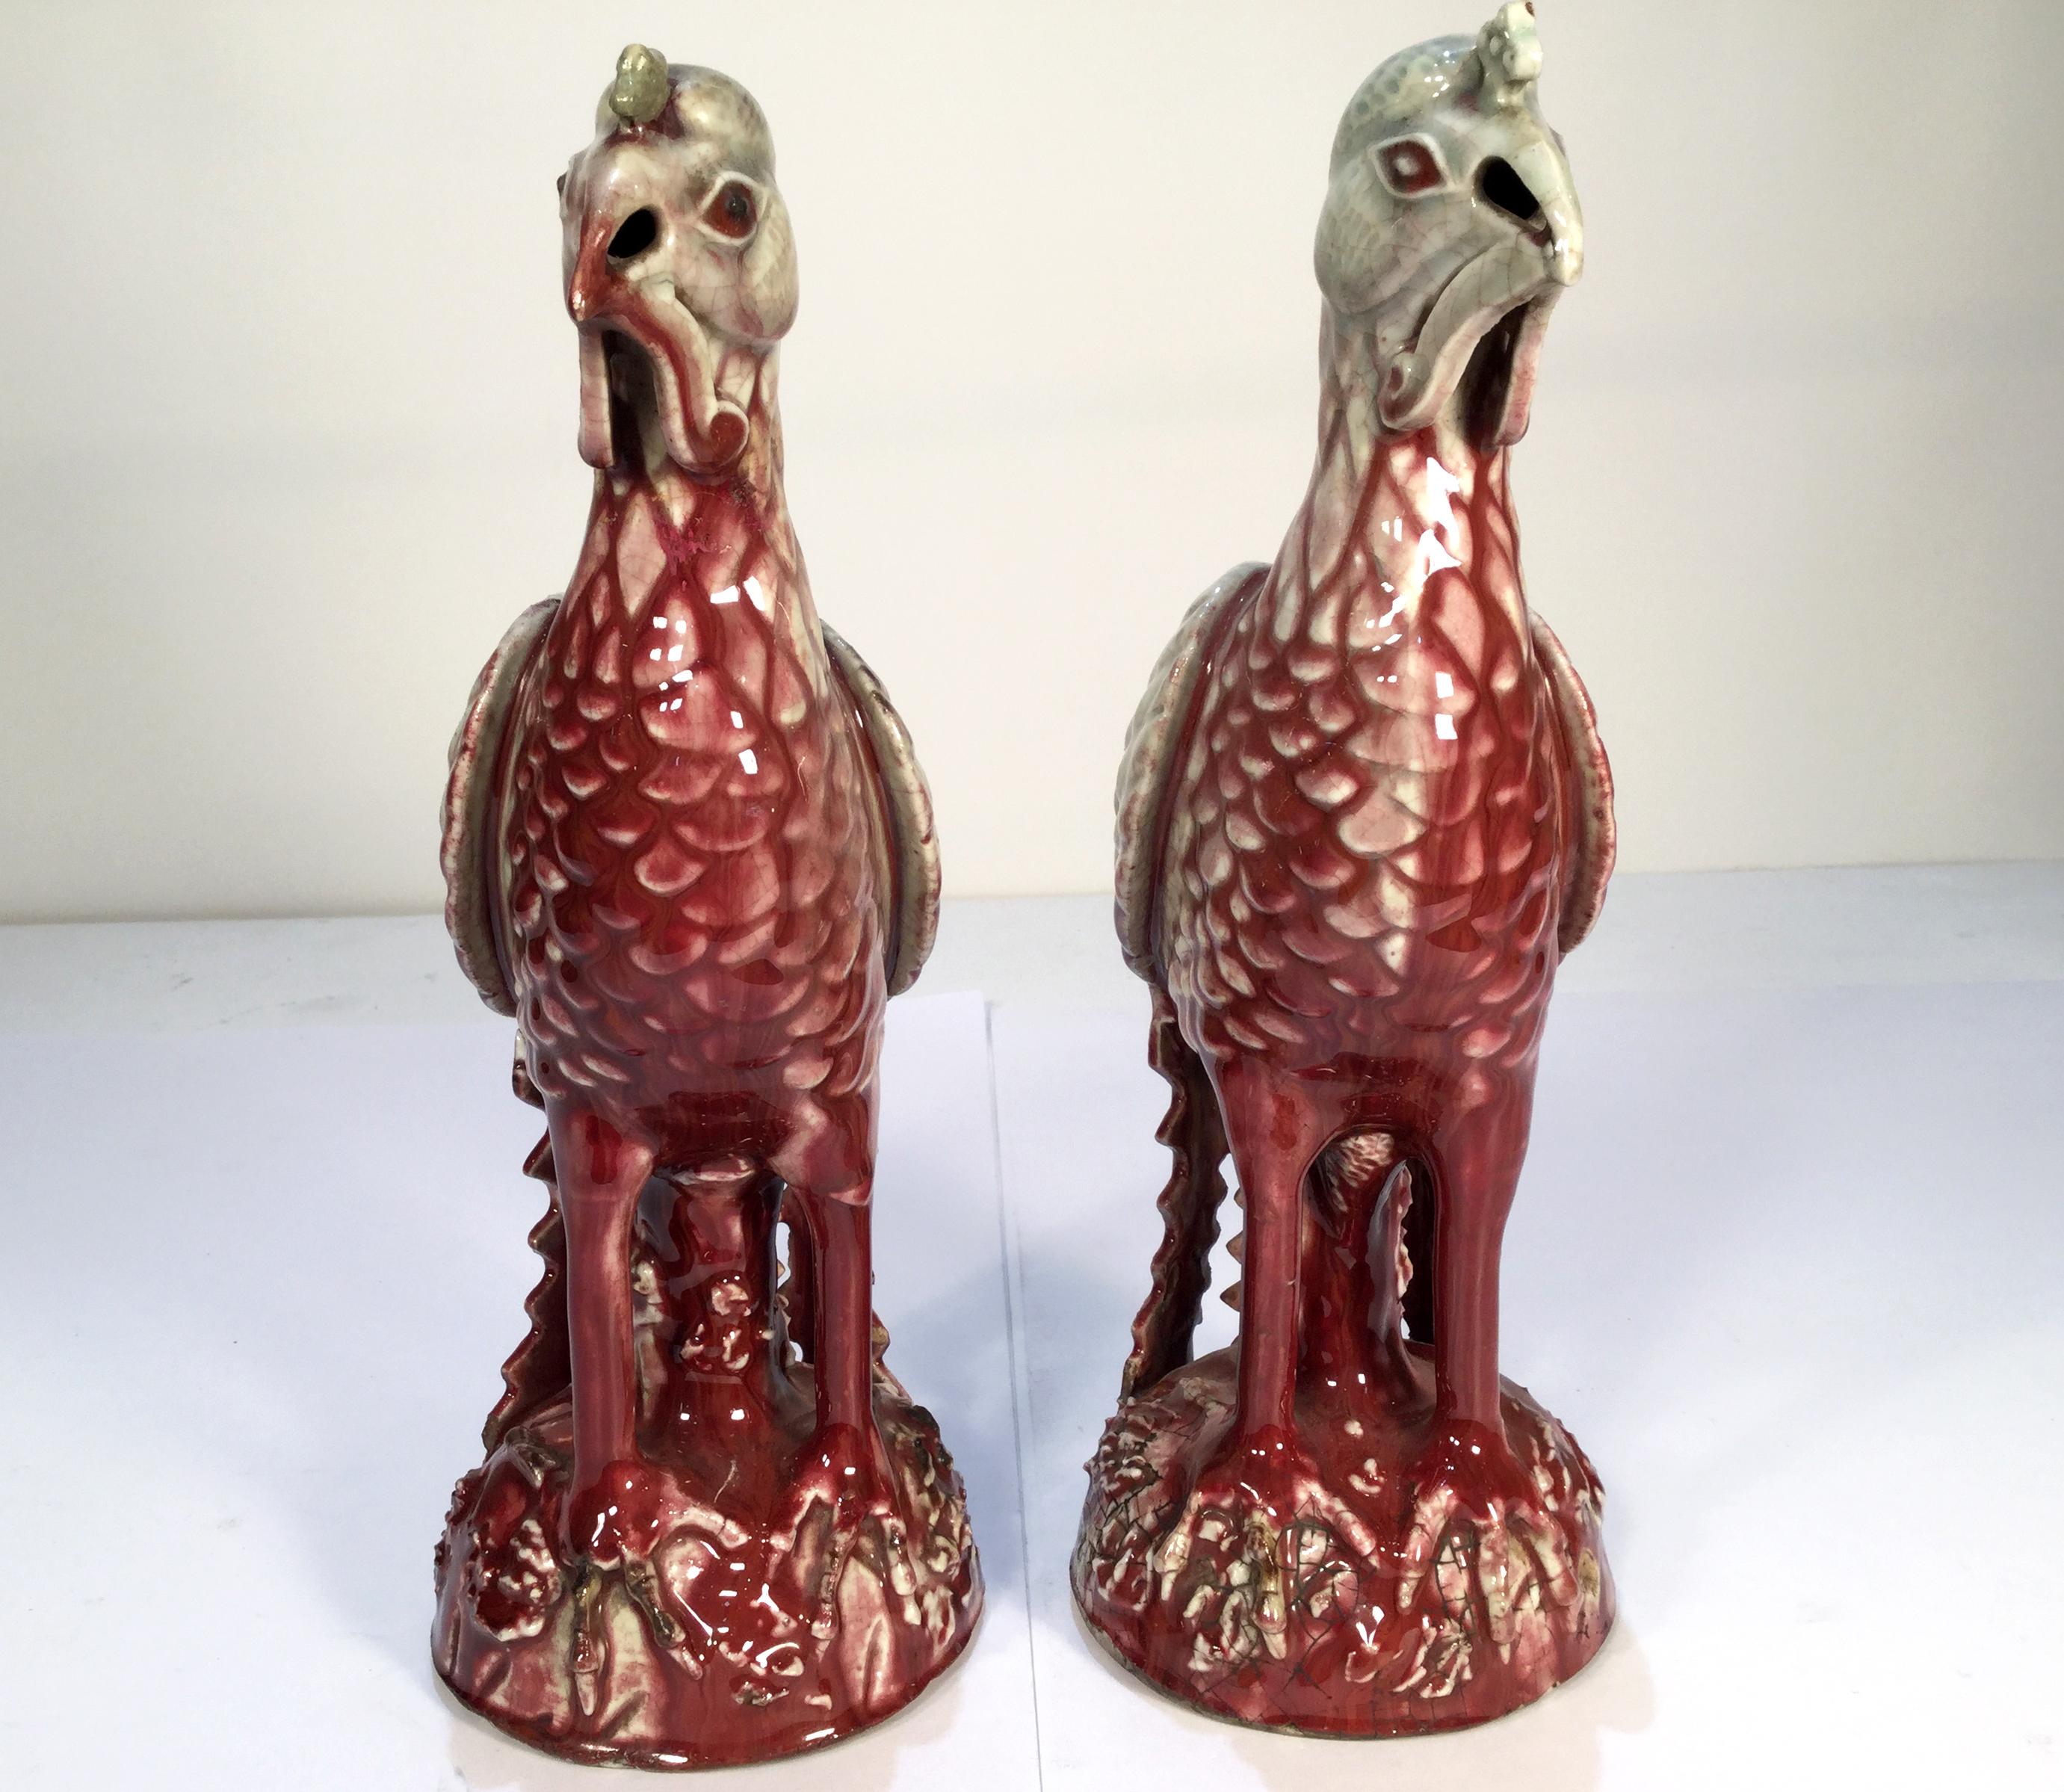 20th century Chinese Export pair of Sang de Boeuf ceramic Ho Ho Birds with a wonderful celadon glaze. This pair of bird sculptures have a strong Classic design in a Art Deco manner.